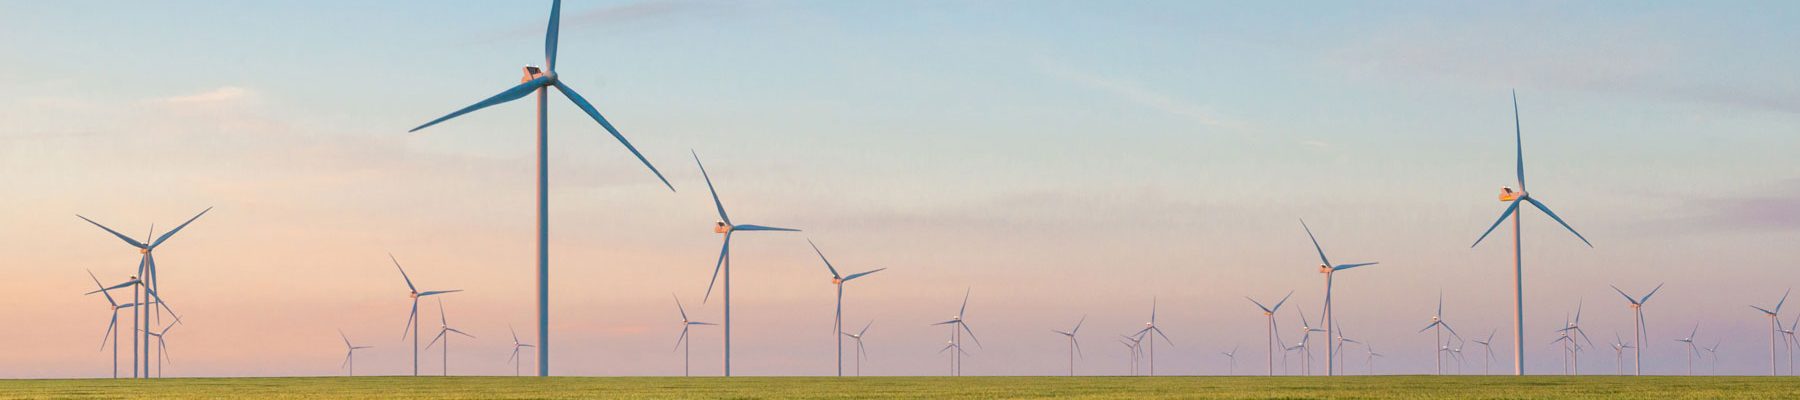 Online Master of Energy and Environmental Management image of wind turbine natural resources energy field. 